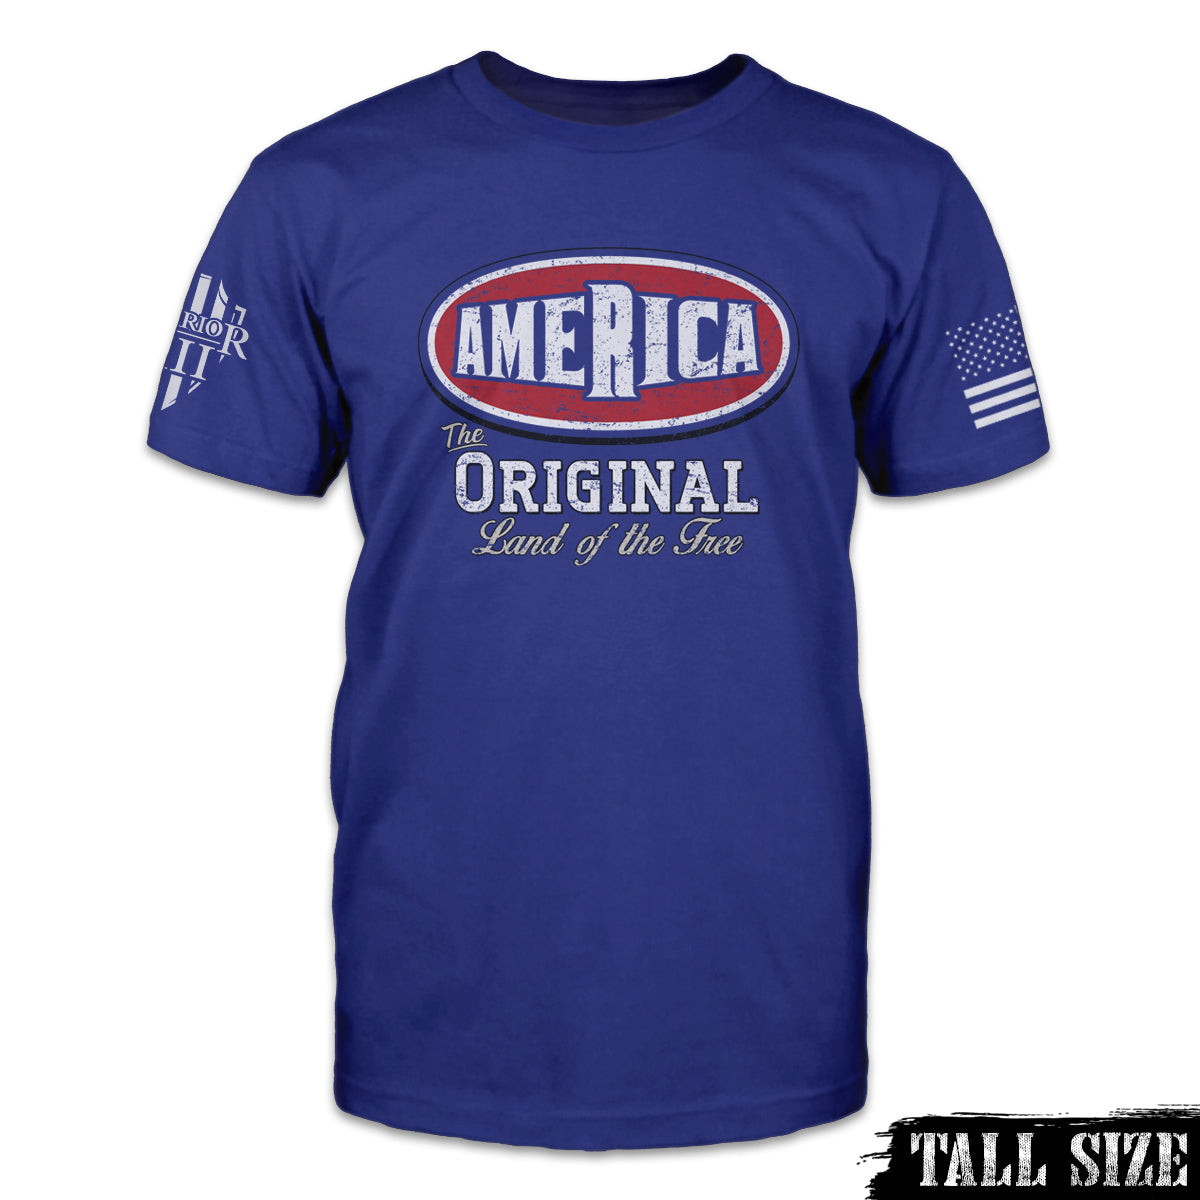 A blue tall sized t-shirt with "America - The Original Land Of The Free" printed on the front of the shirt.